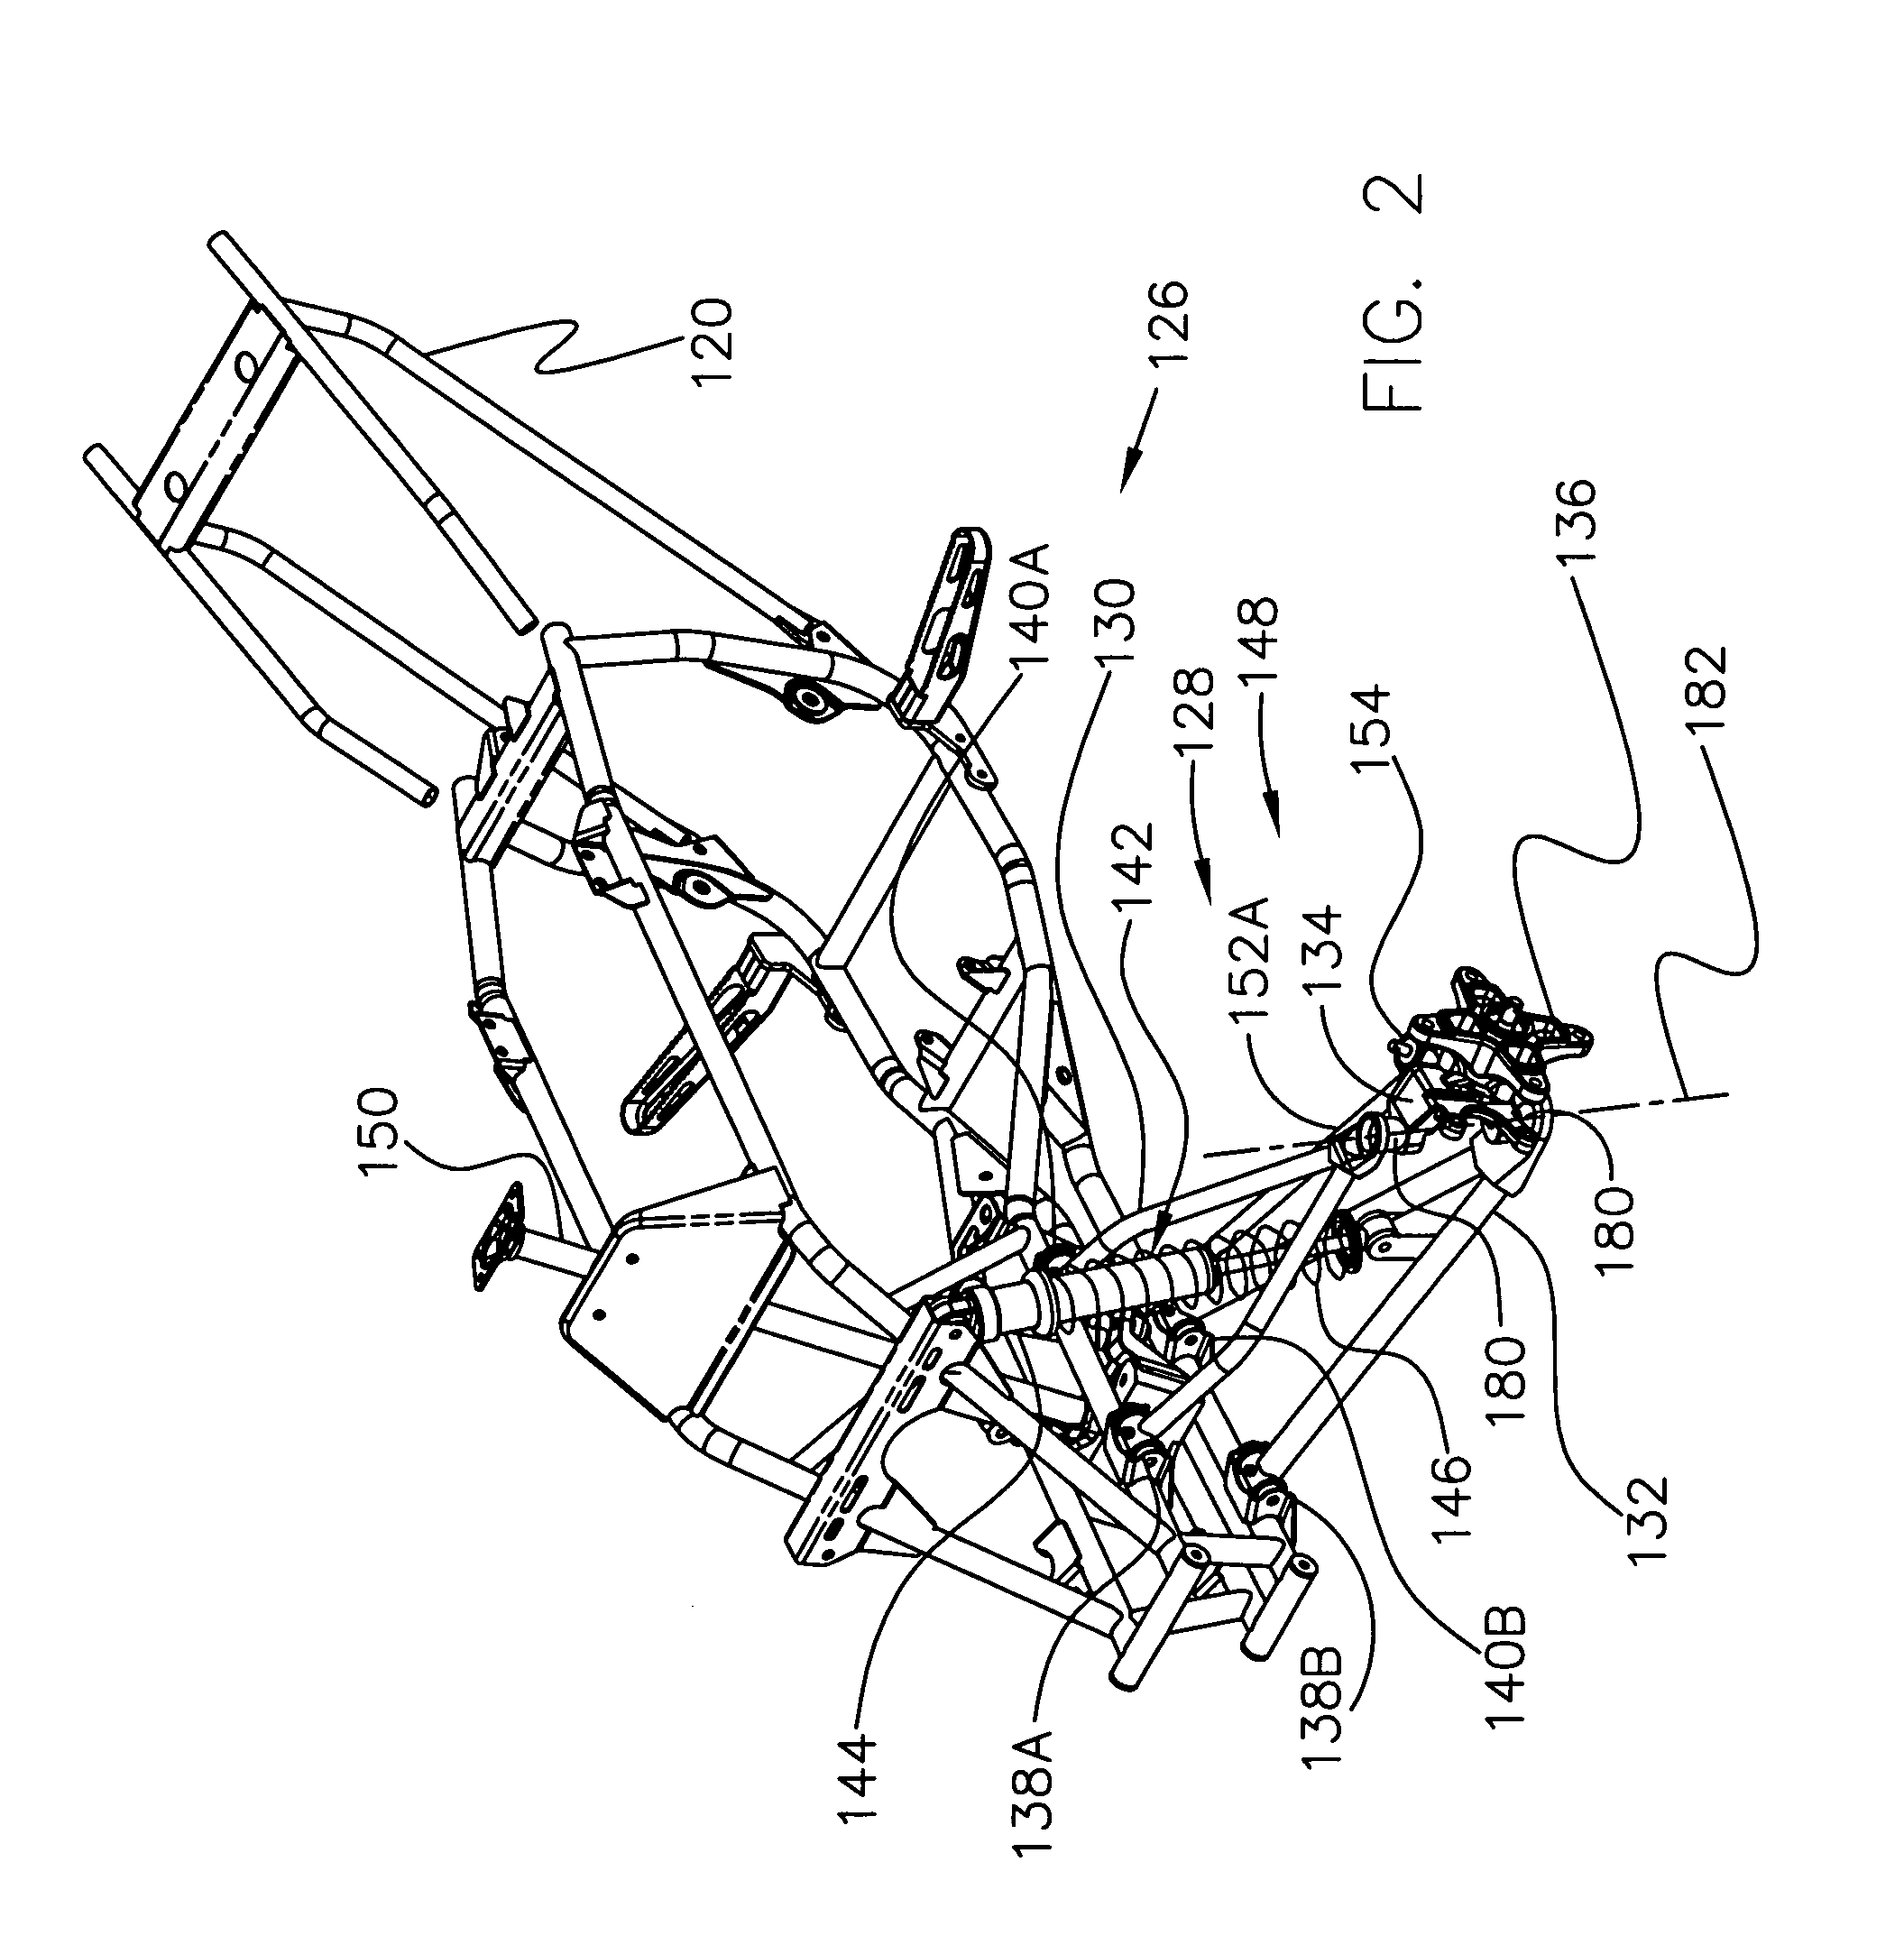 Methods and apparatus for steering an ATV